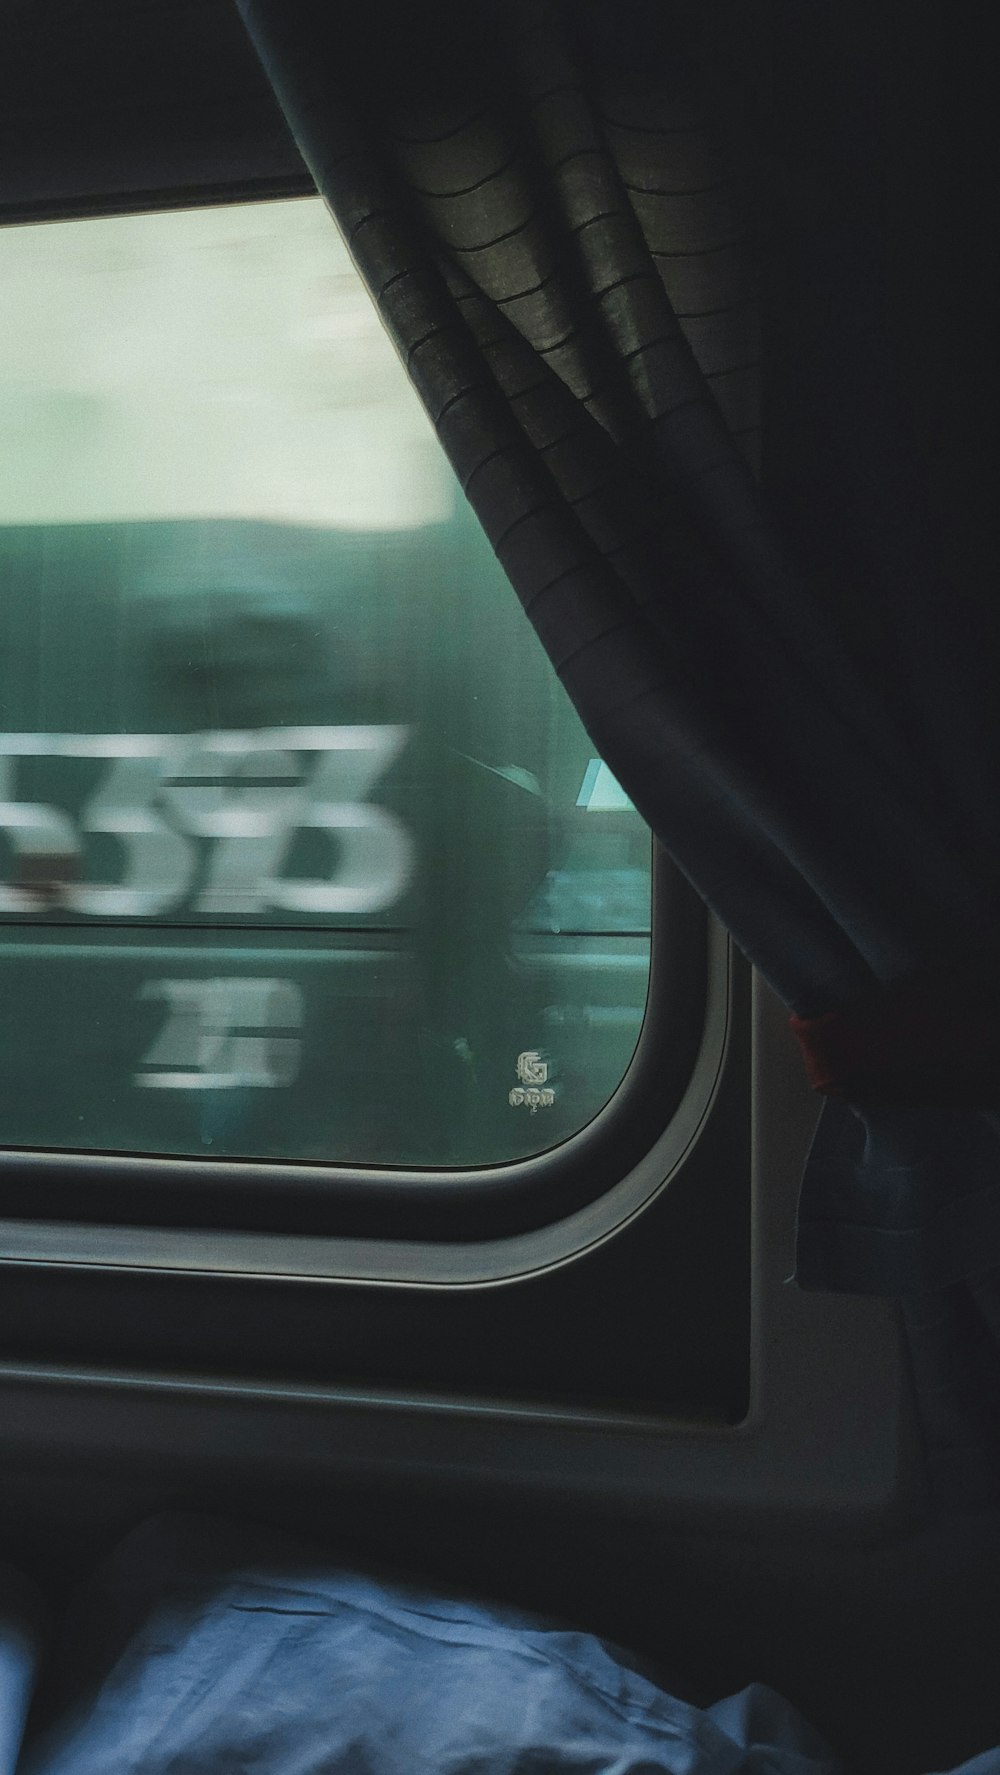 a view of a train from inside a vehicle